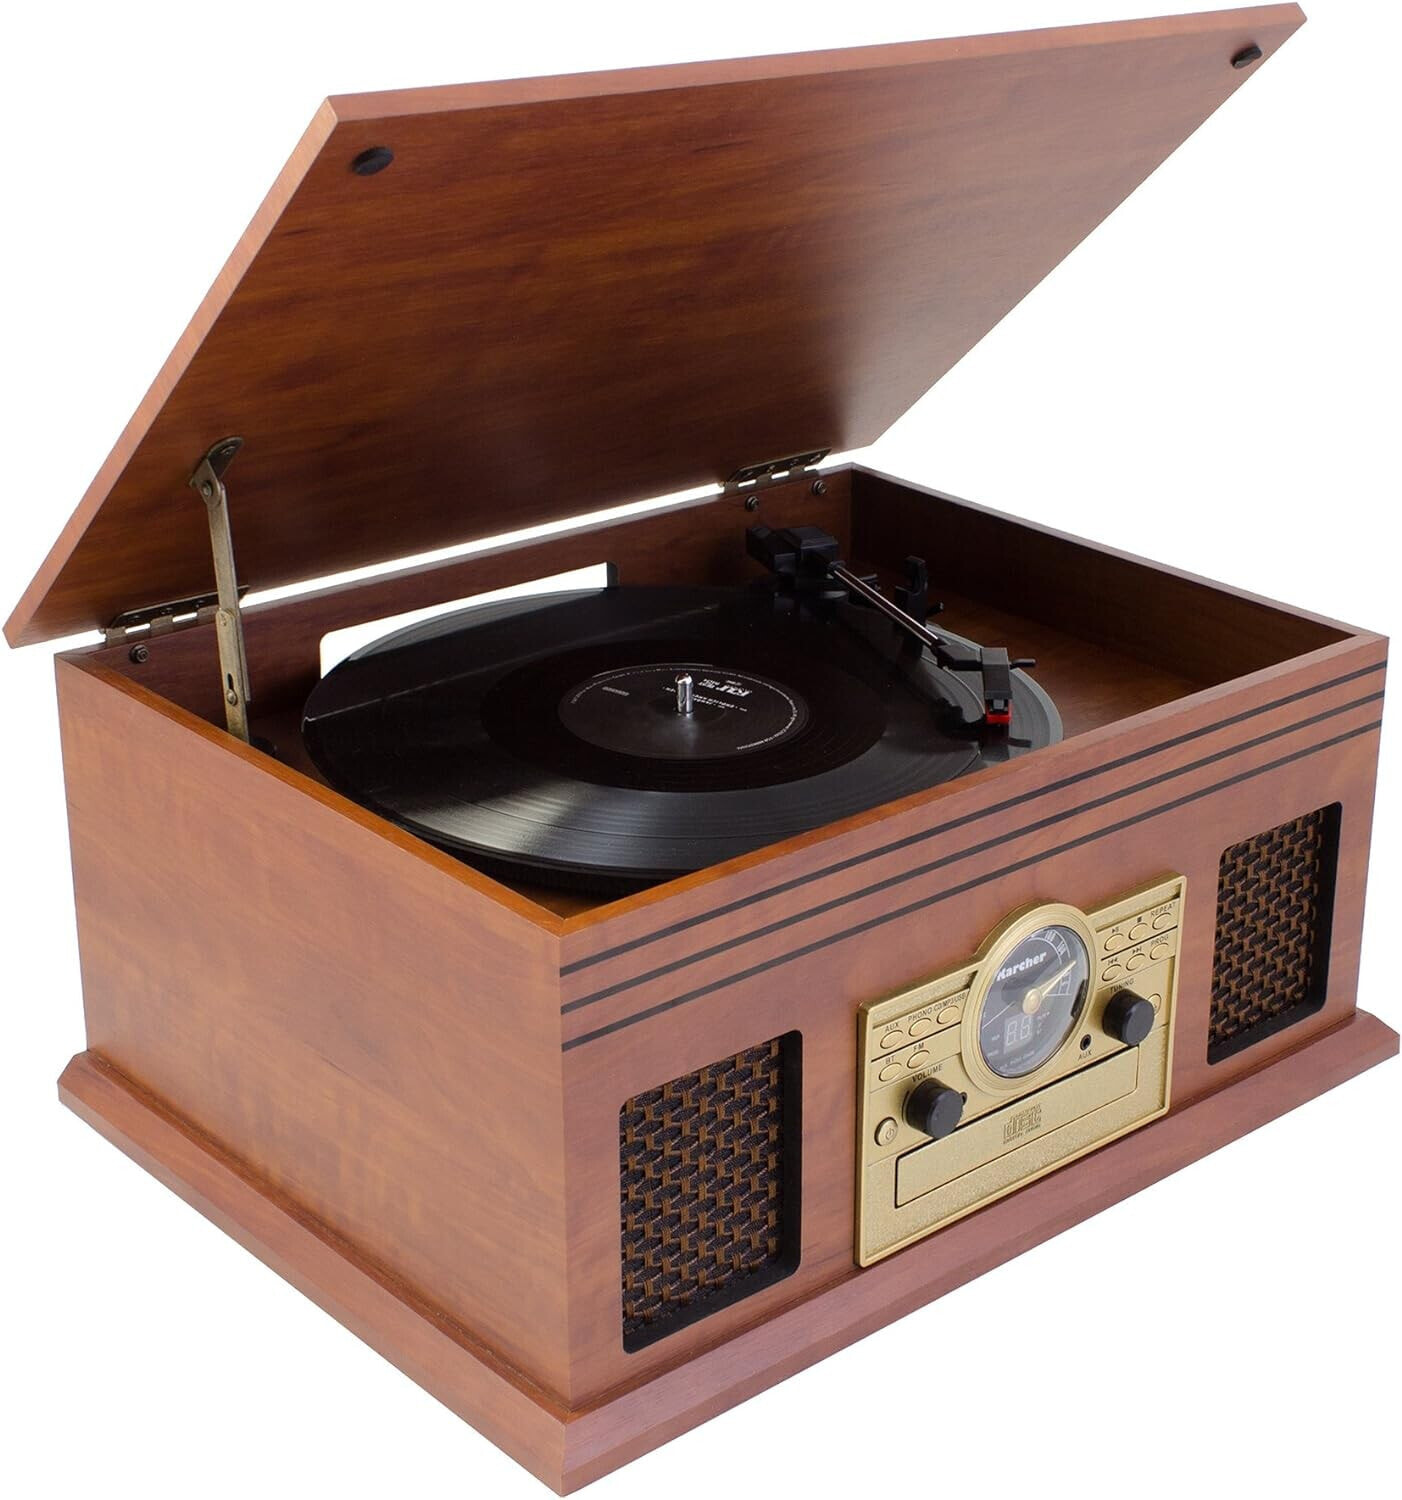 Karcher NO-036 Nostalgia Wooden Music Centre Compact System with Turntable, CD Player, Bluetooth, Cassette Deck, USB and Radio